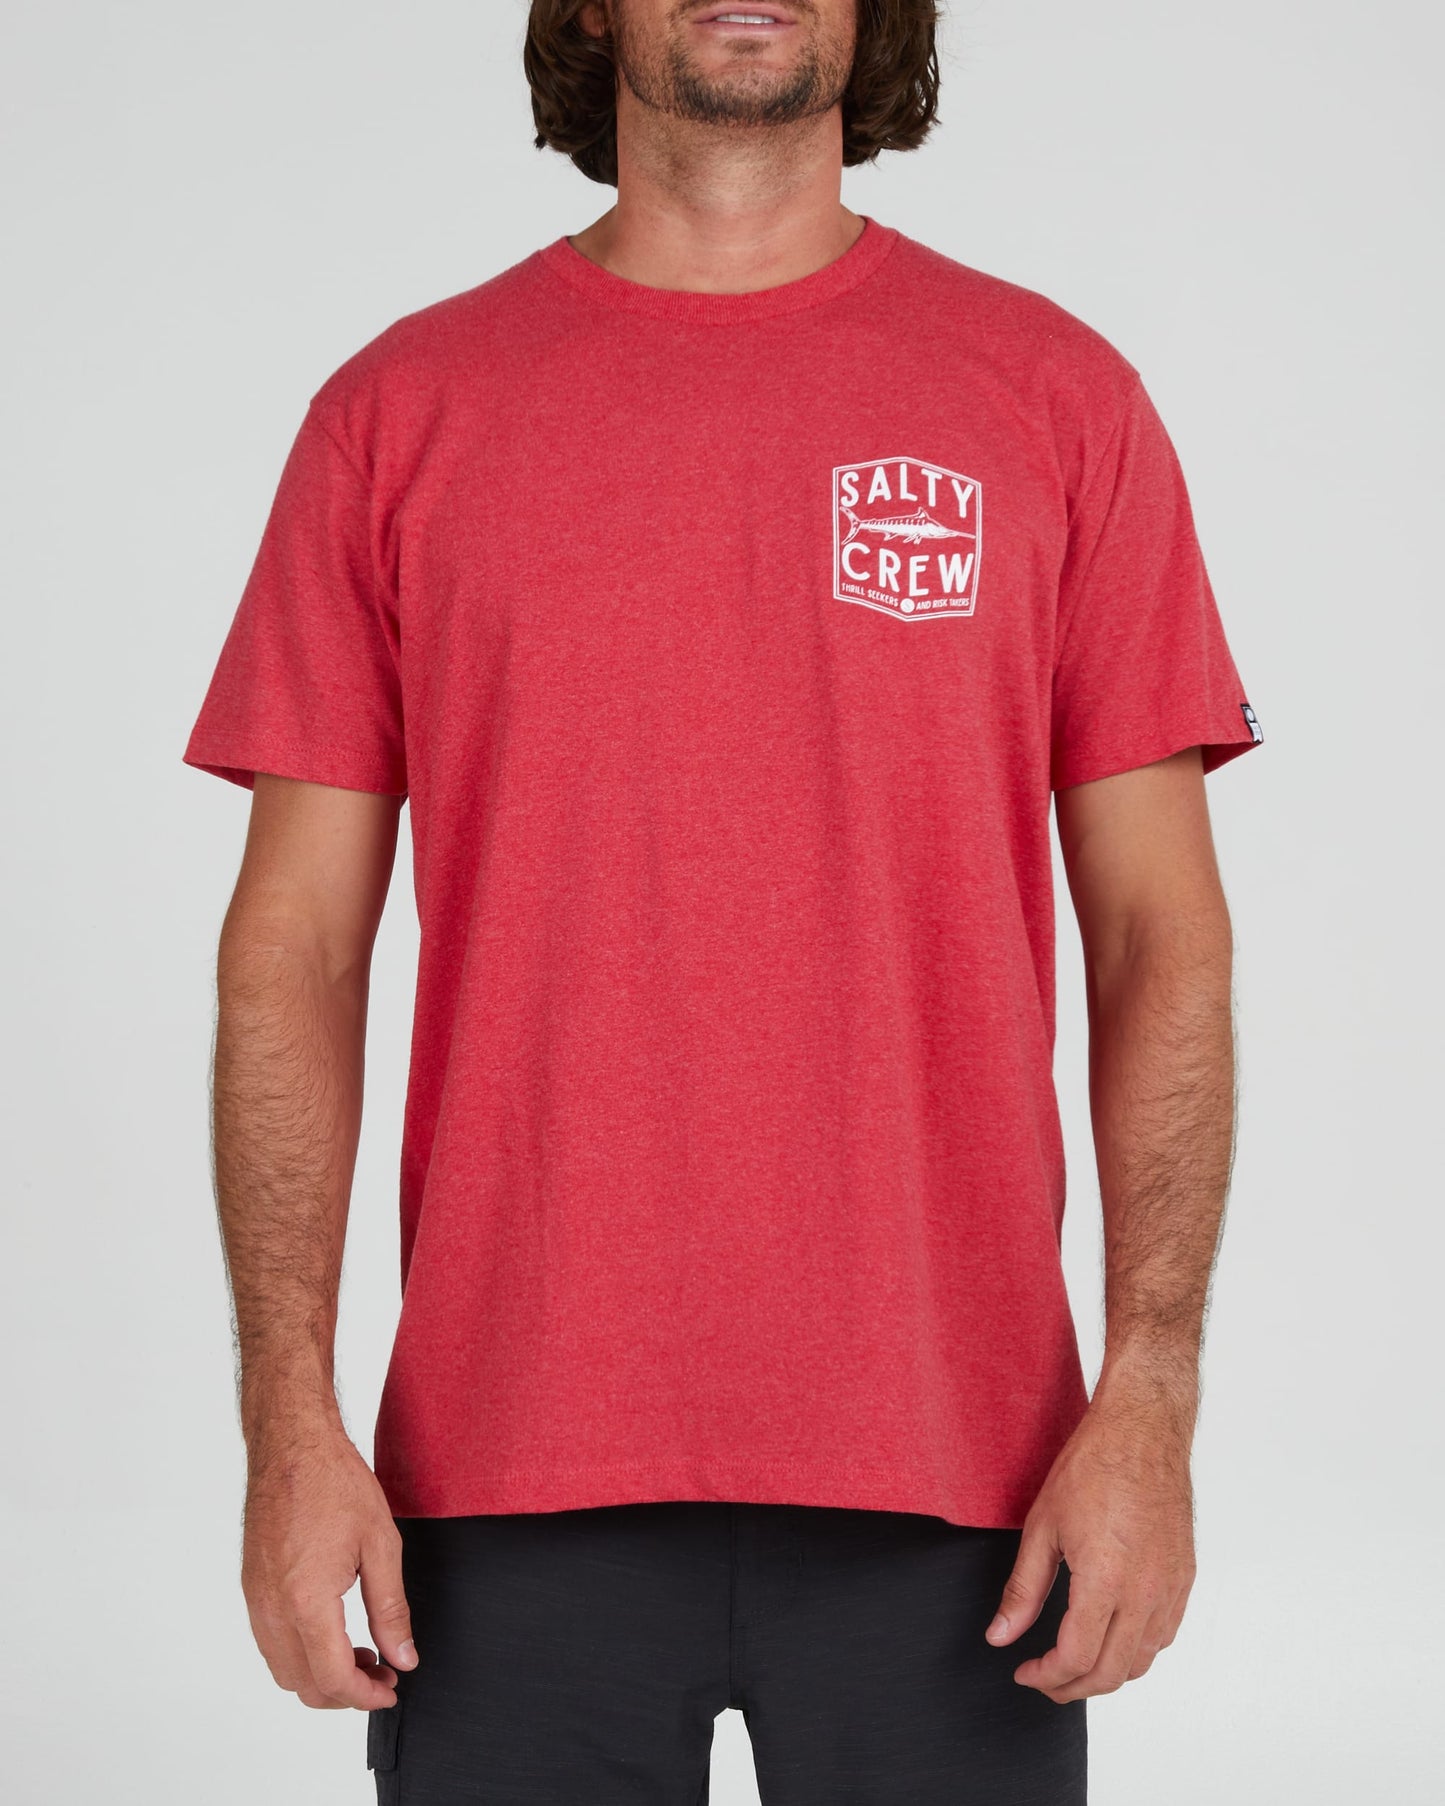 Salty crew T-SHIRTS S/S FISHERY STANDARD S/S TEE - Red Heather in Red Heather